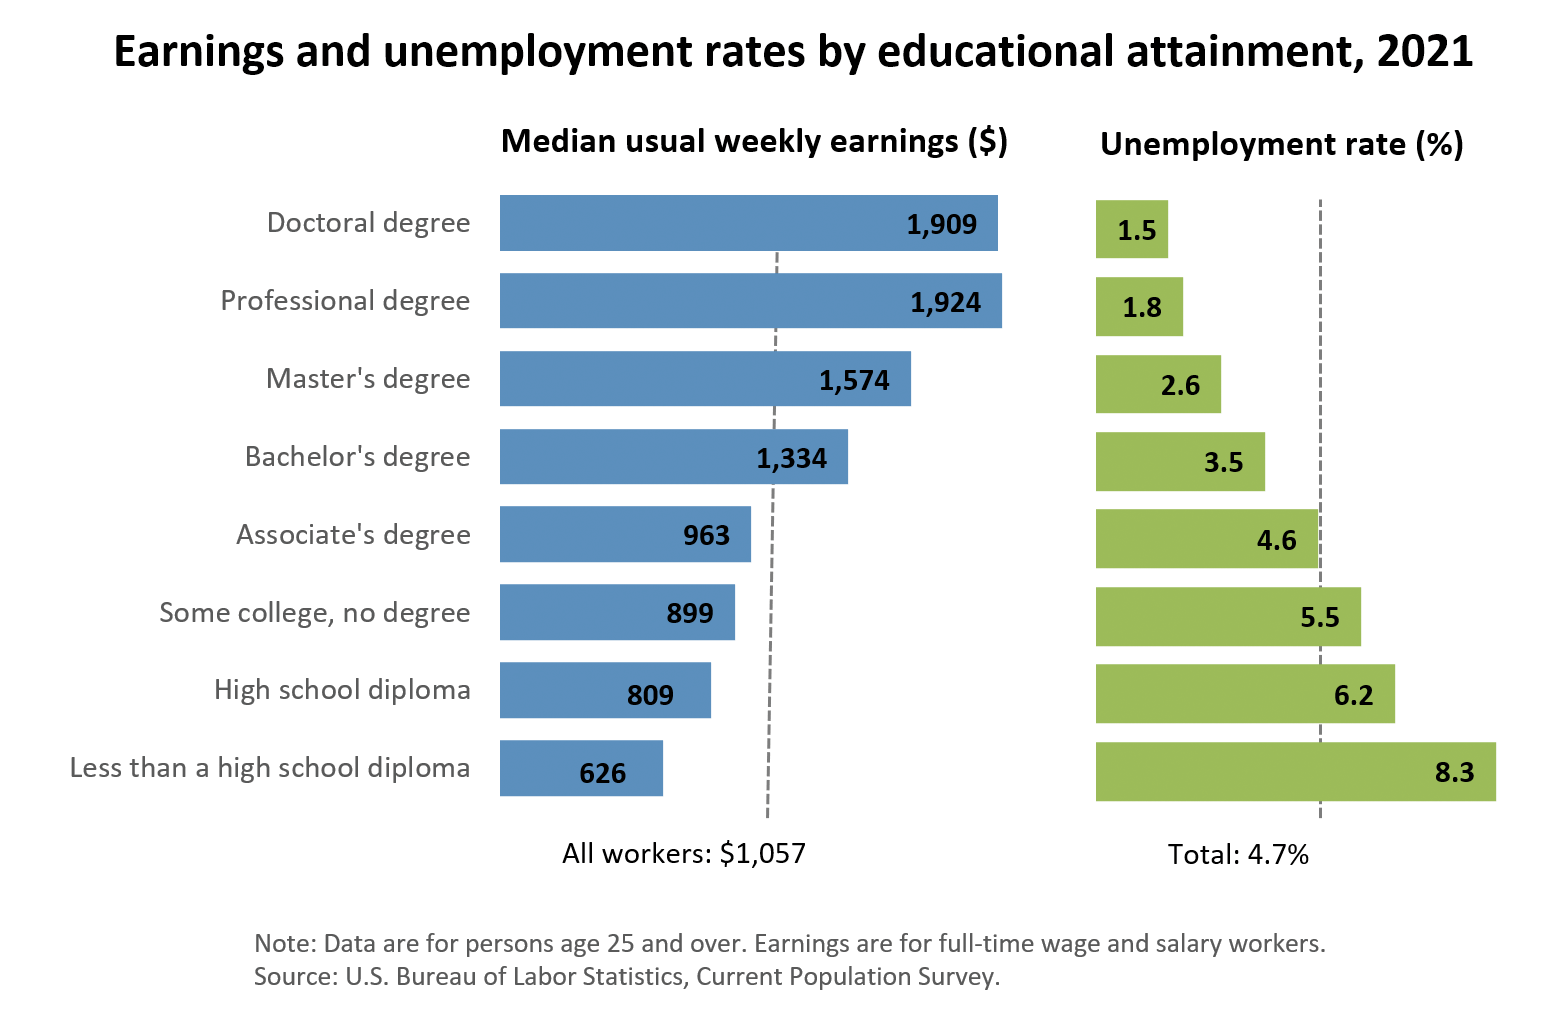 Chart showing Unemployment rates and earnings by educational attainment, 2021